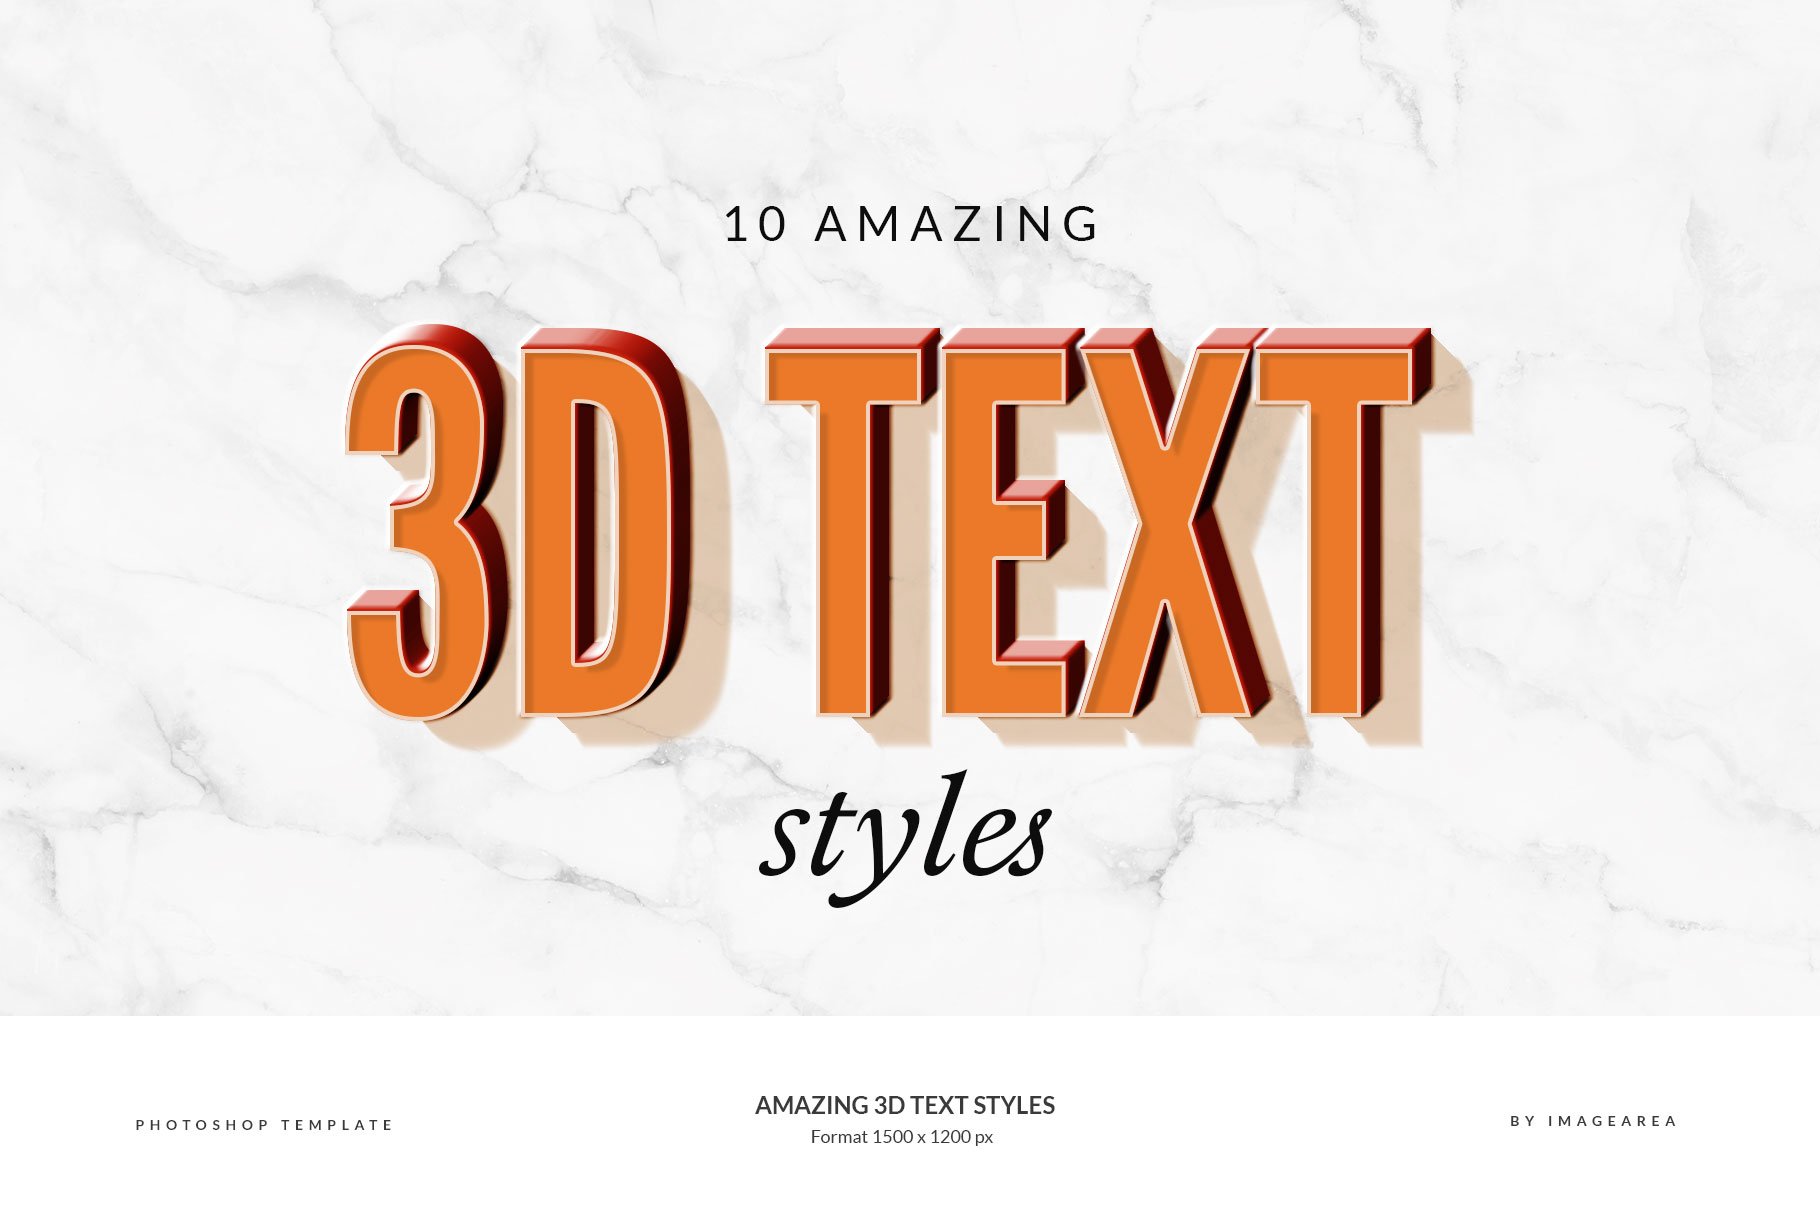 3D Text Stylespreview image.